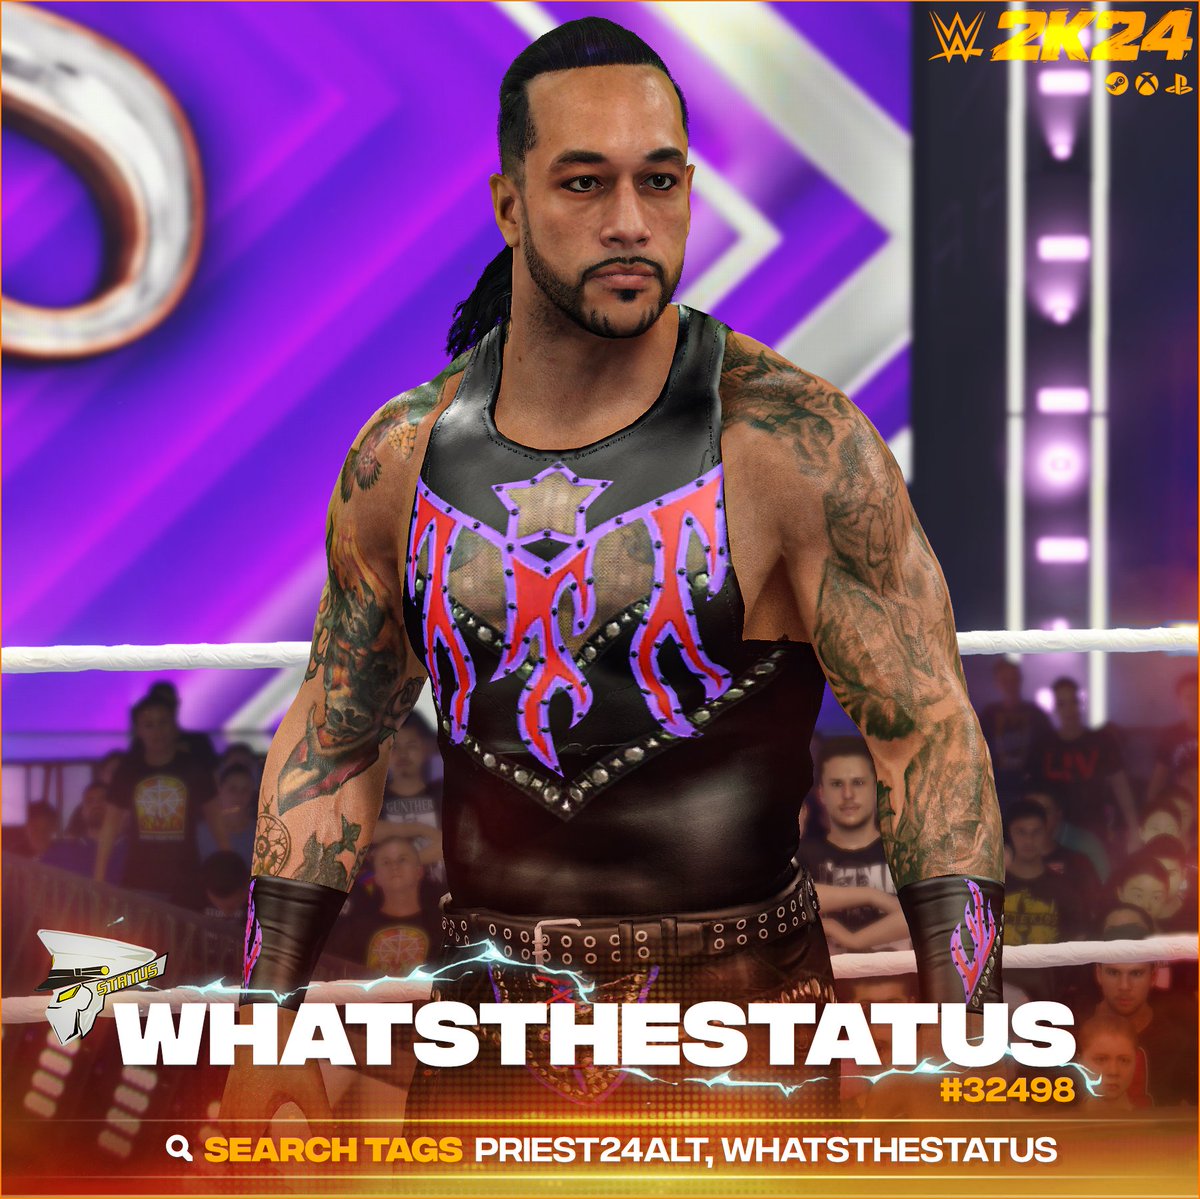 NEW! #WWE2K24 Upload To Community Creations! ★ Damian Priest '24 (InGame Edit) ★ Search Tag → PRIEST24ALT or WhatsTheStatus ★ Collaboration with @GameVolt1 ★ Support Me → linktr.ee/WhatsTheStatus ★ INCLUDES ● Custom Portrait ● Updated Beard ● Updated Make up ●…